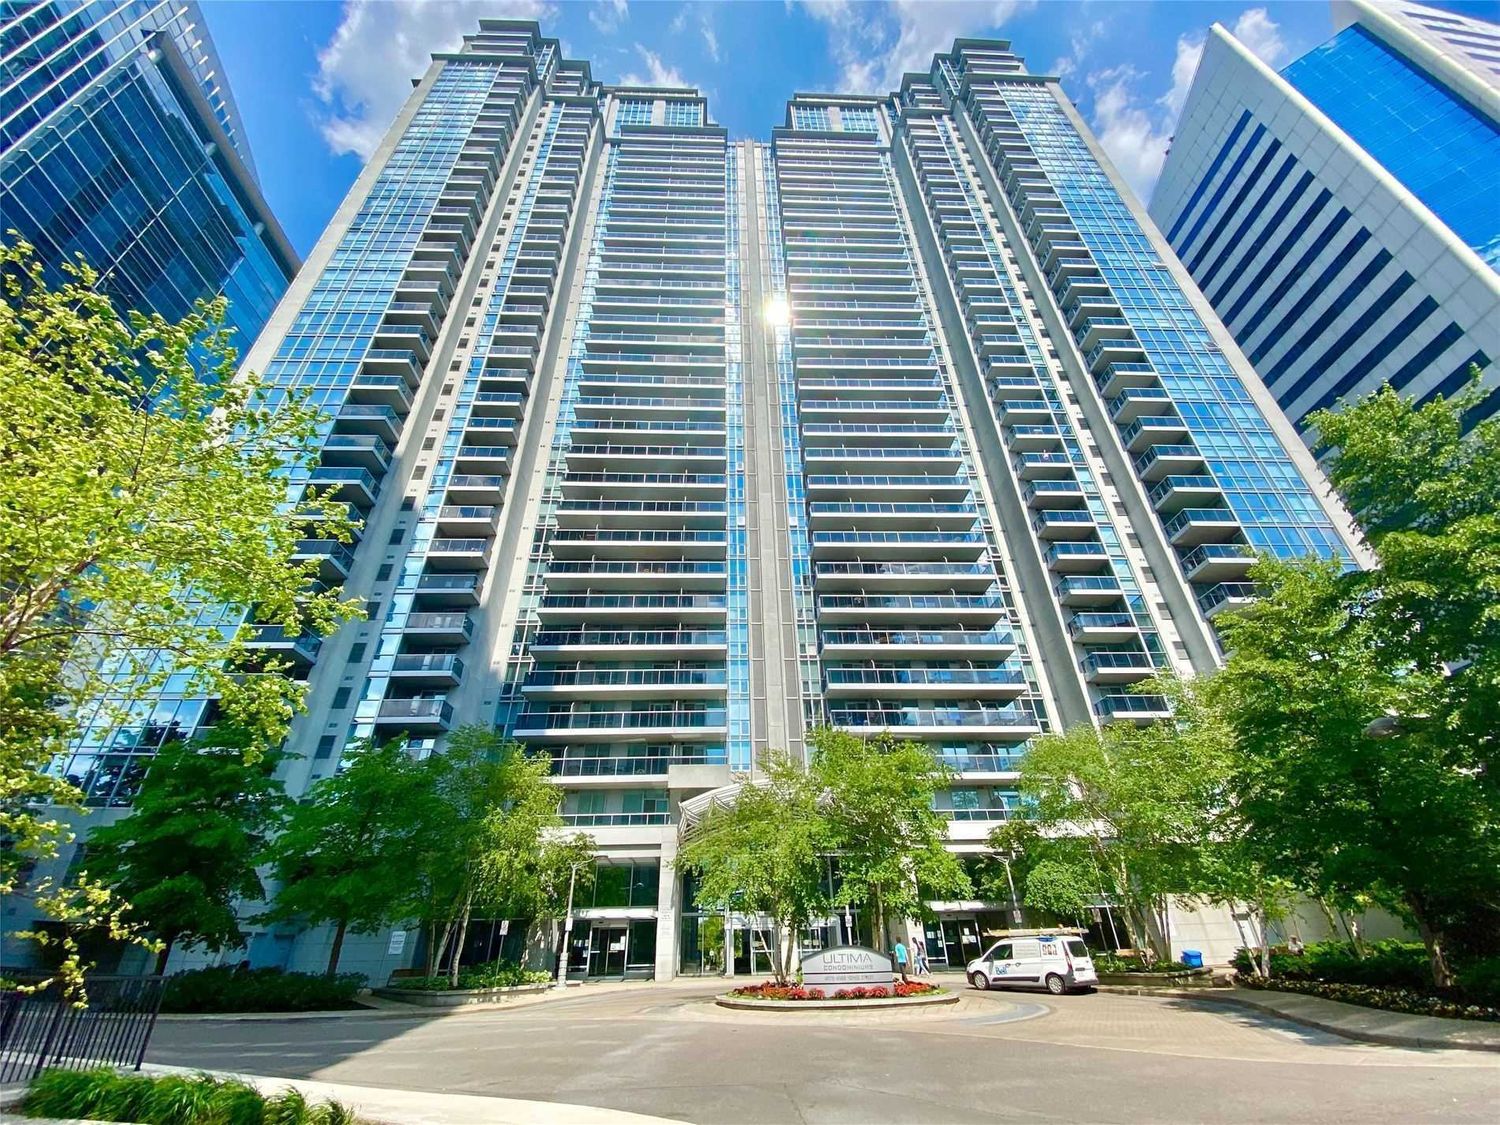 4978 Yonge St. This condo at Ultima at Broadway North Tower is located in  North York, Toronto - image #2 of 2 by Strata.ca